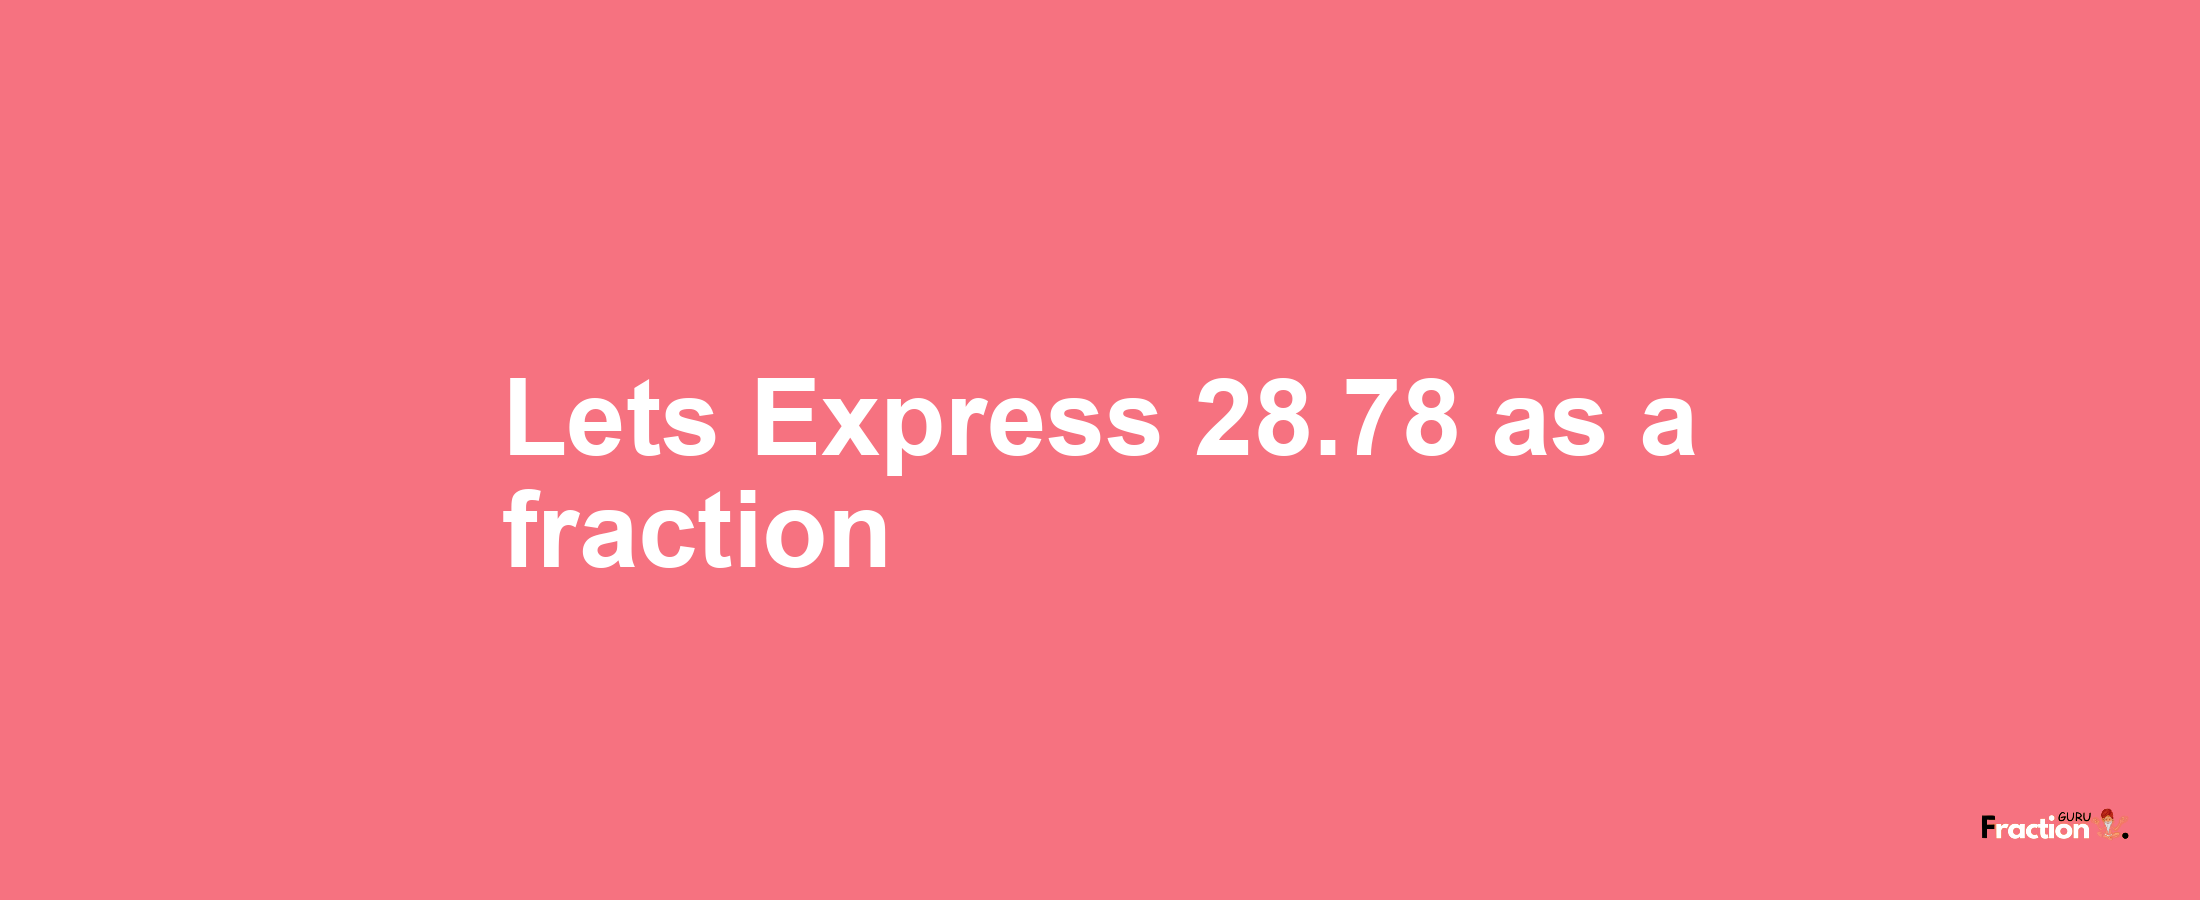 Lets Express 28.78 as afraction